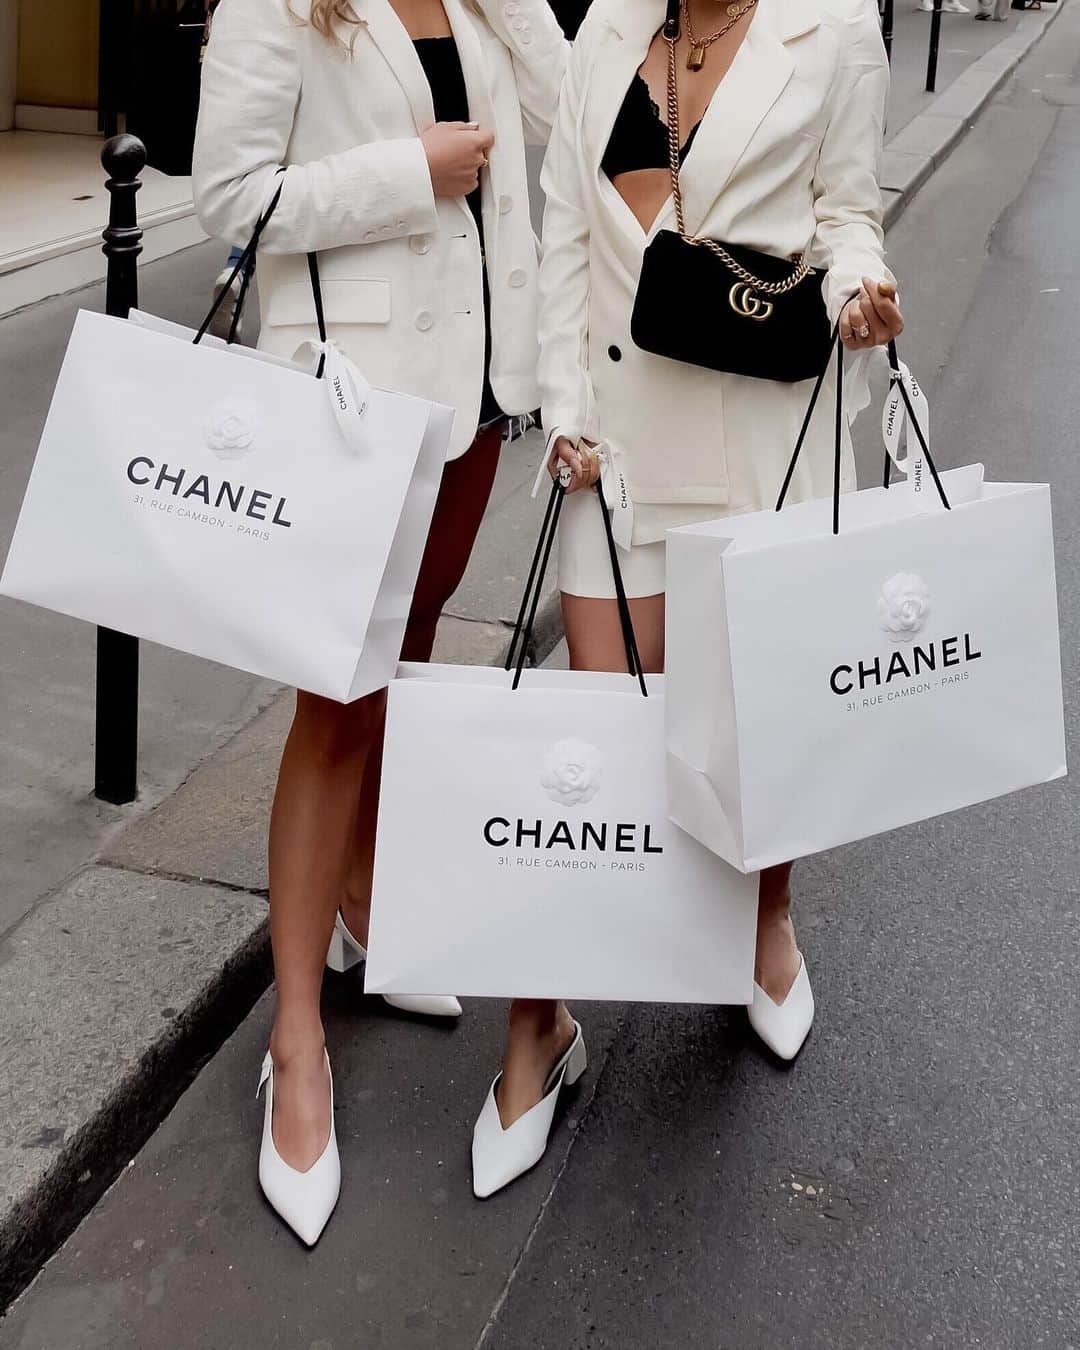 cheapest place to buy chanel